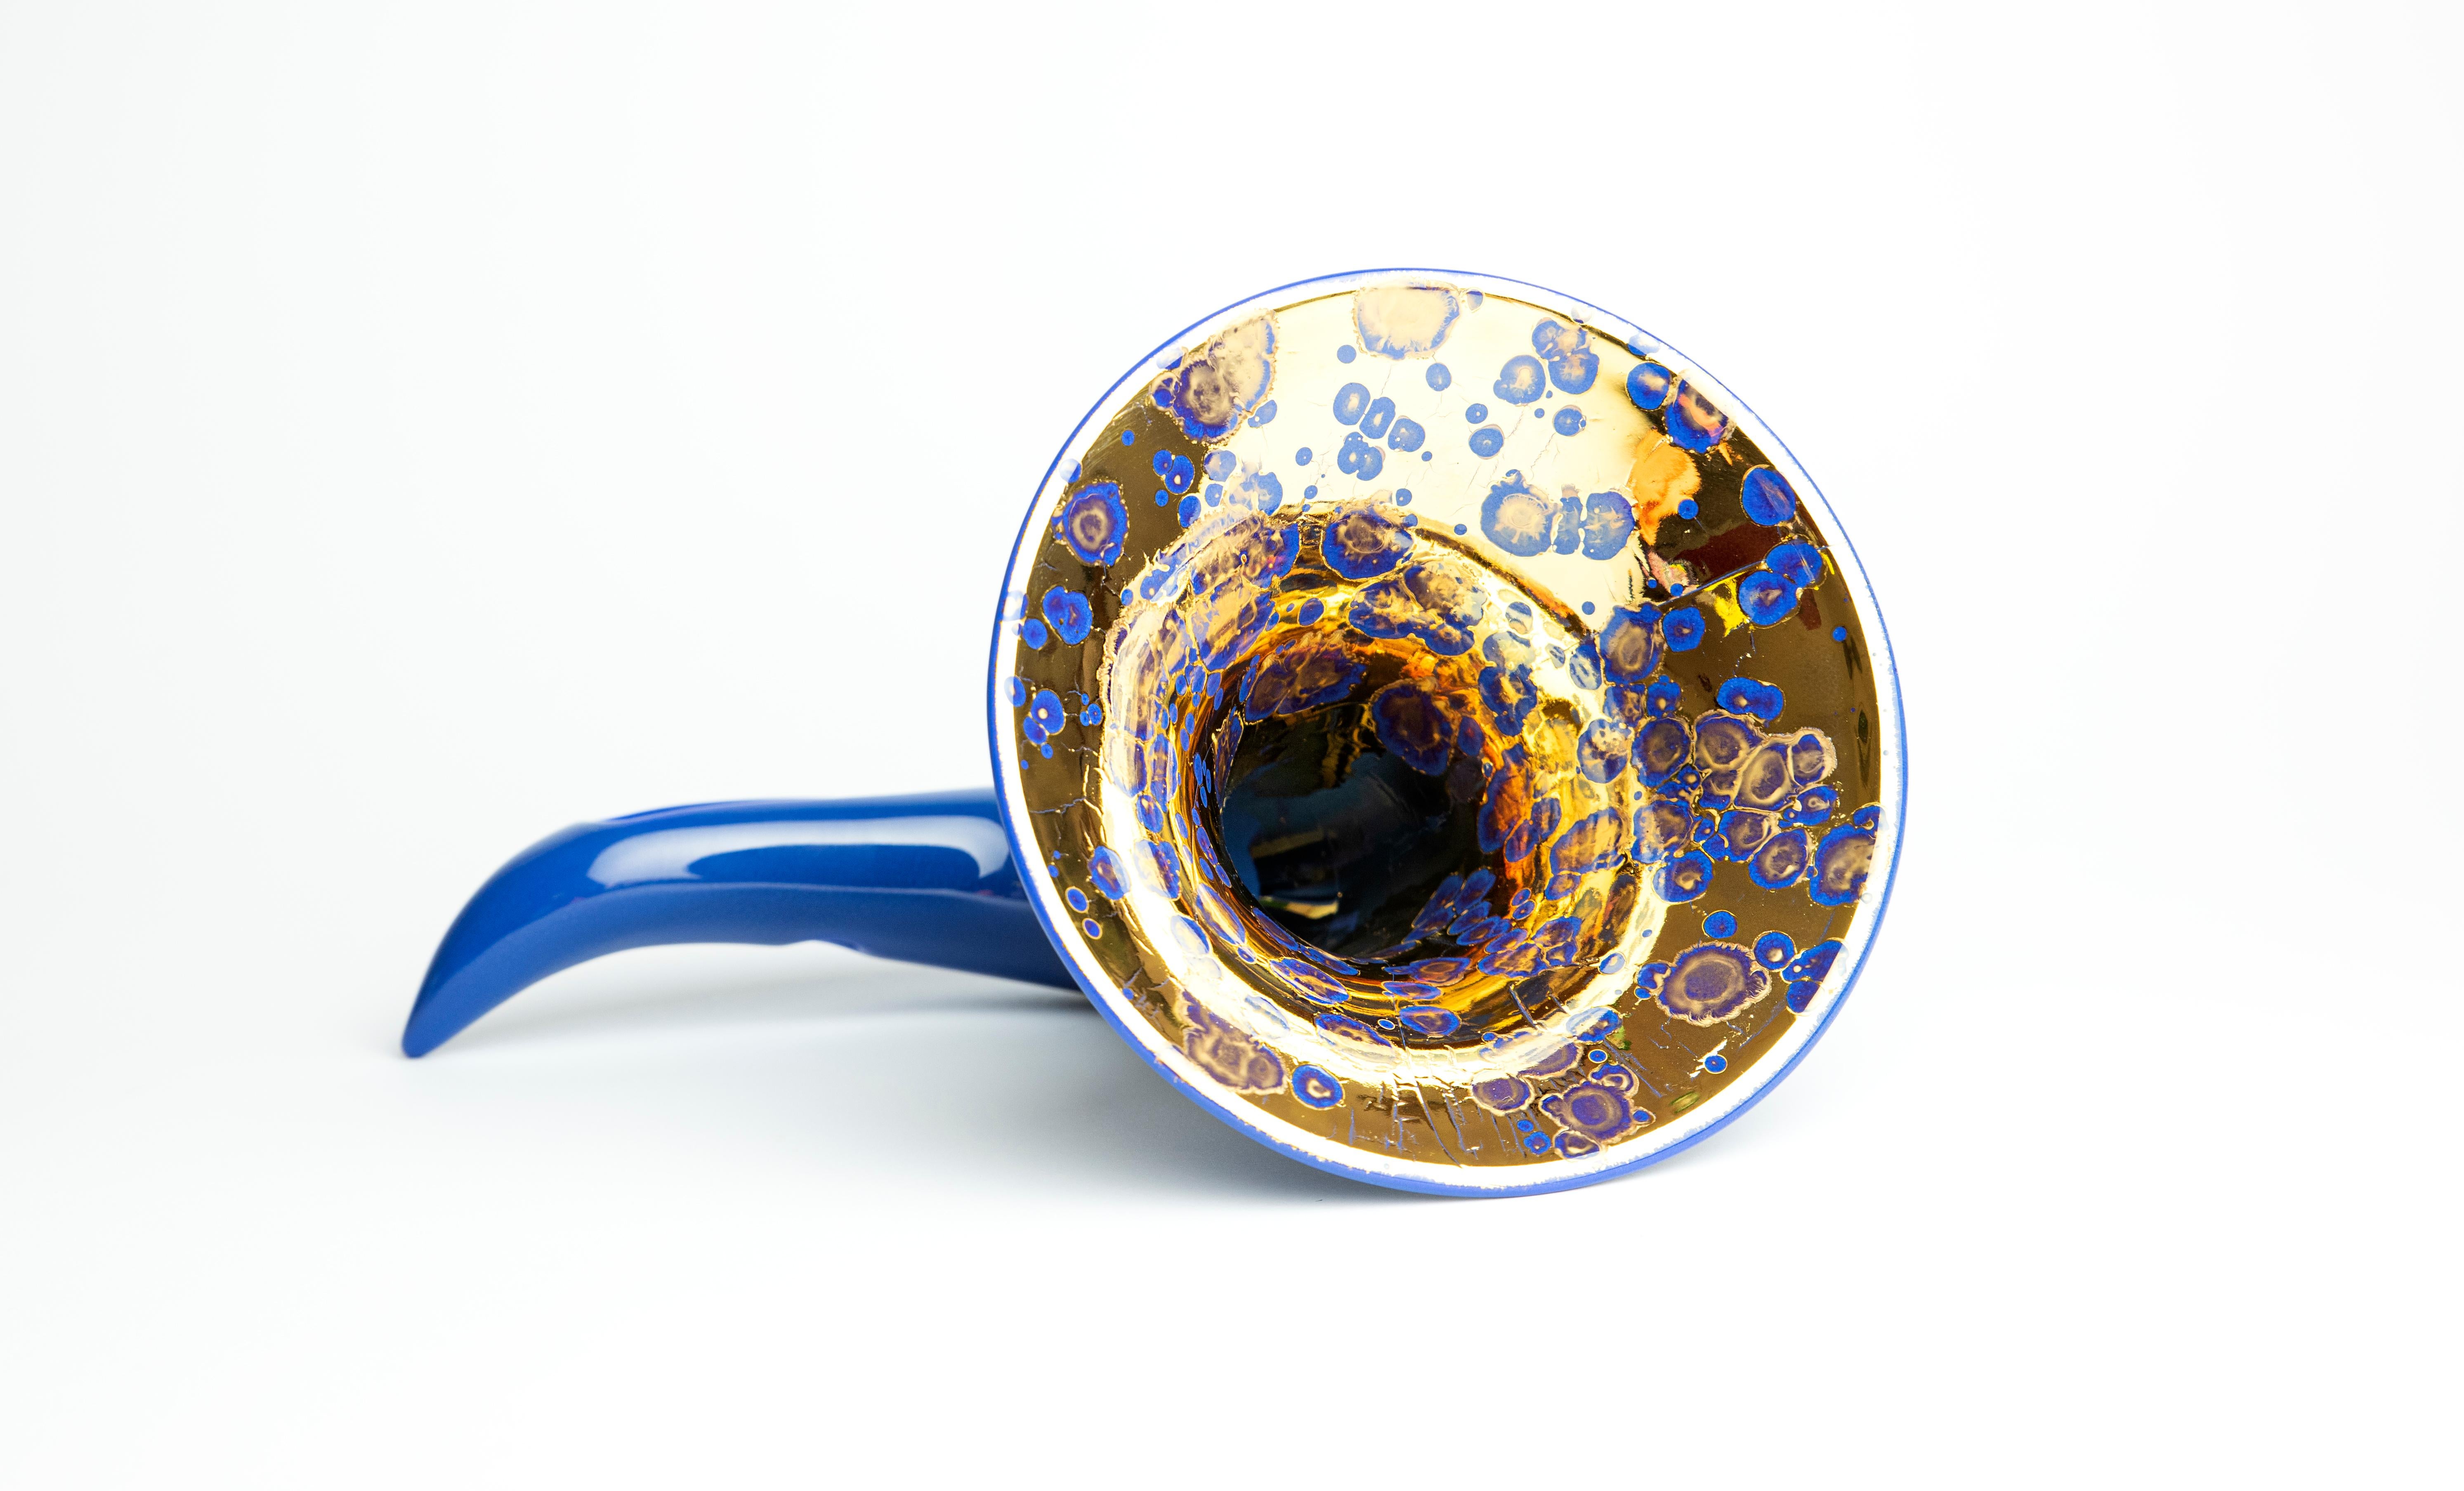 Contemporary Made in Italy Sound Amplifier, Blue & Gold Ceramics, Customizable Speaker, 2022 For Sale